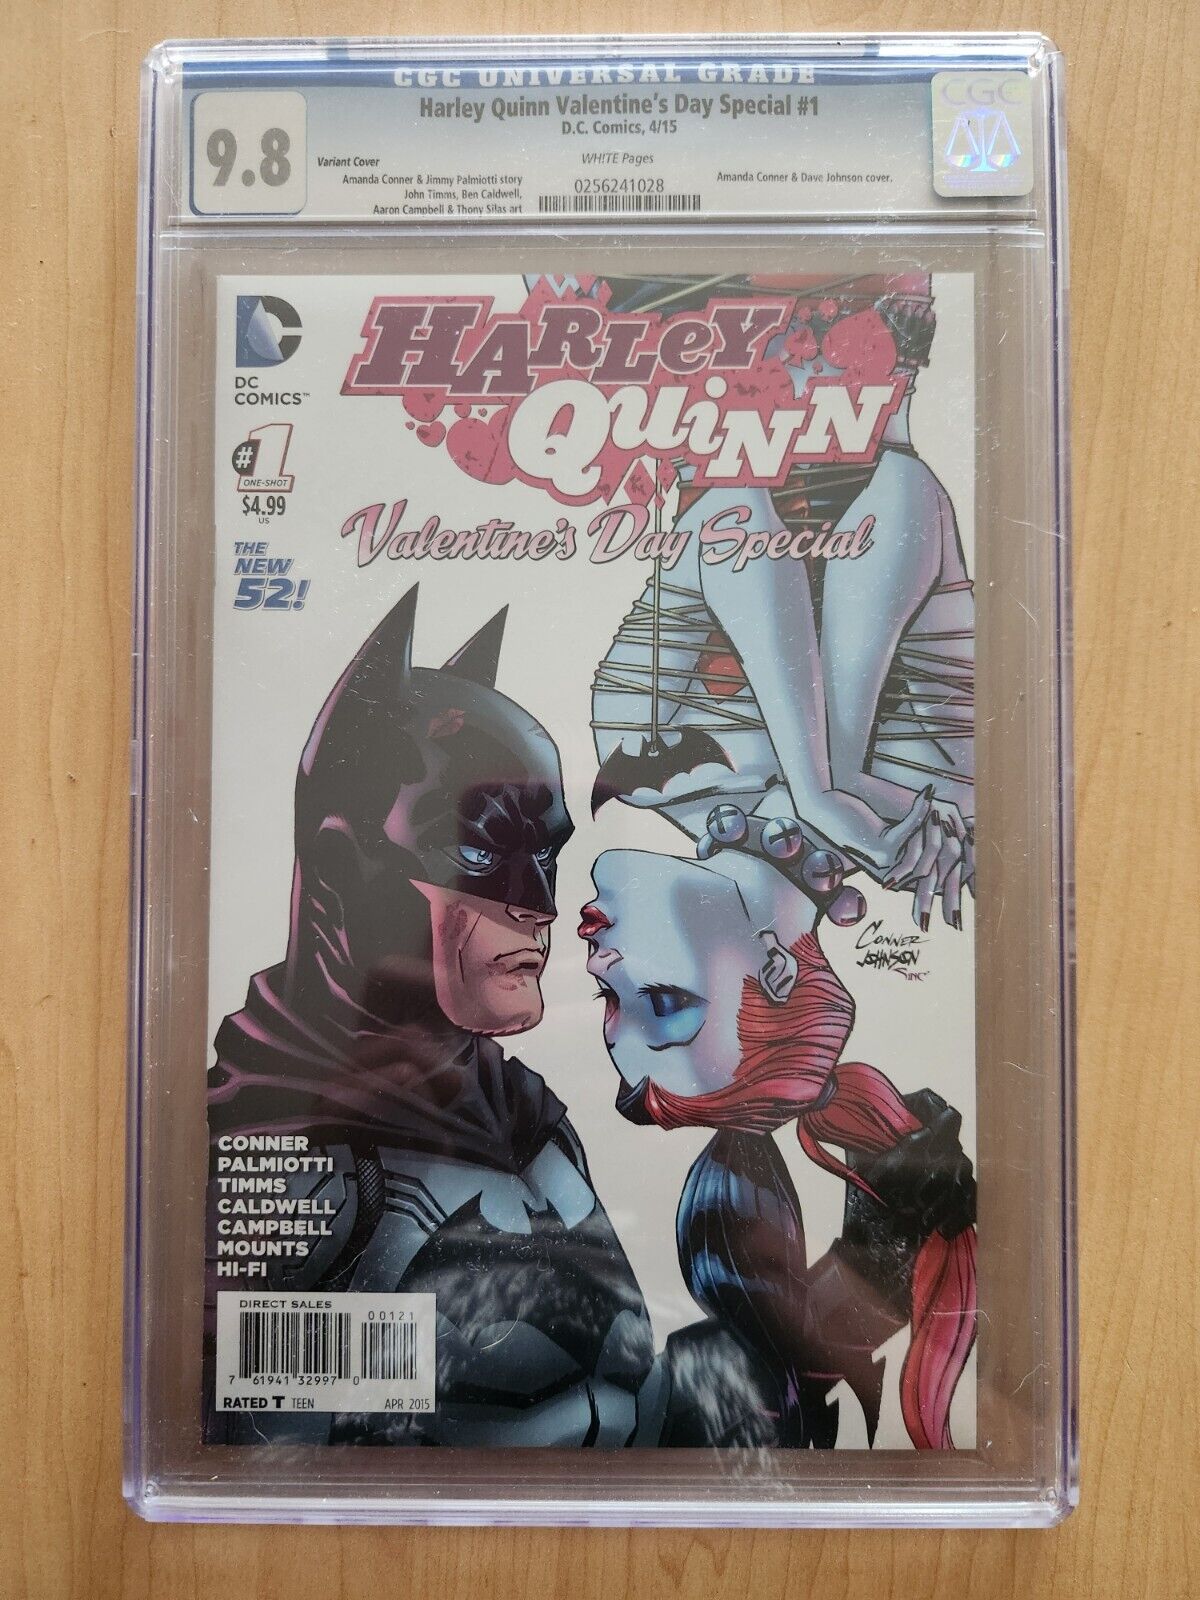 Harley Quinn Valentine\'s Day Special 1B Conner CGC 9.8  2015